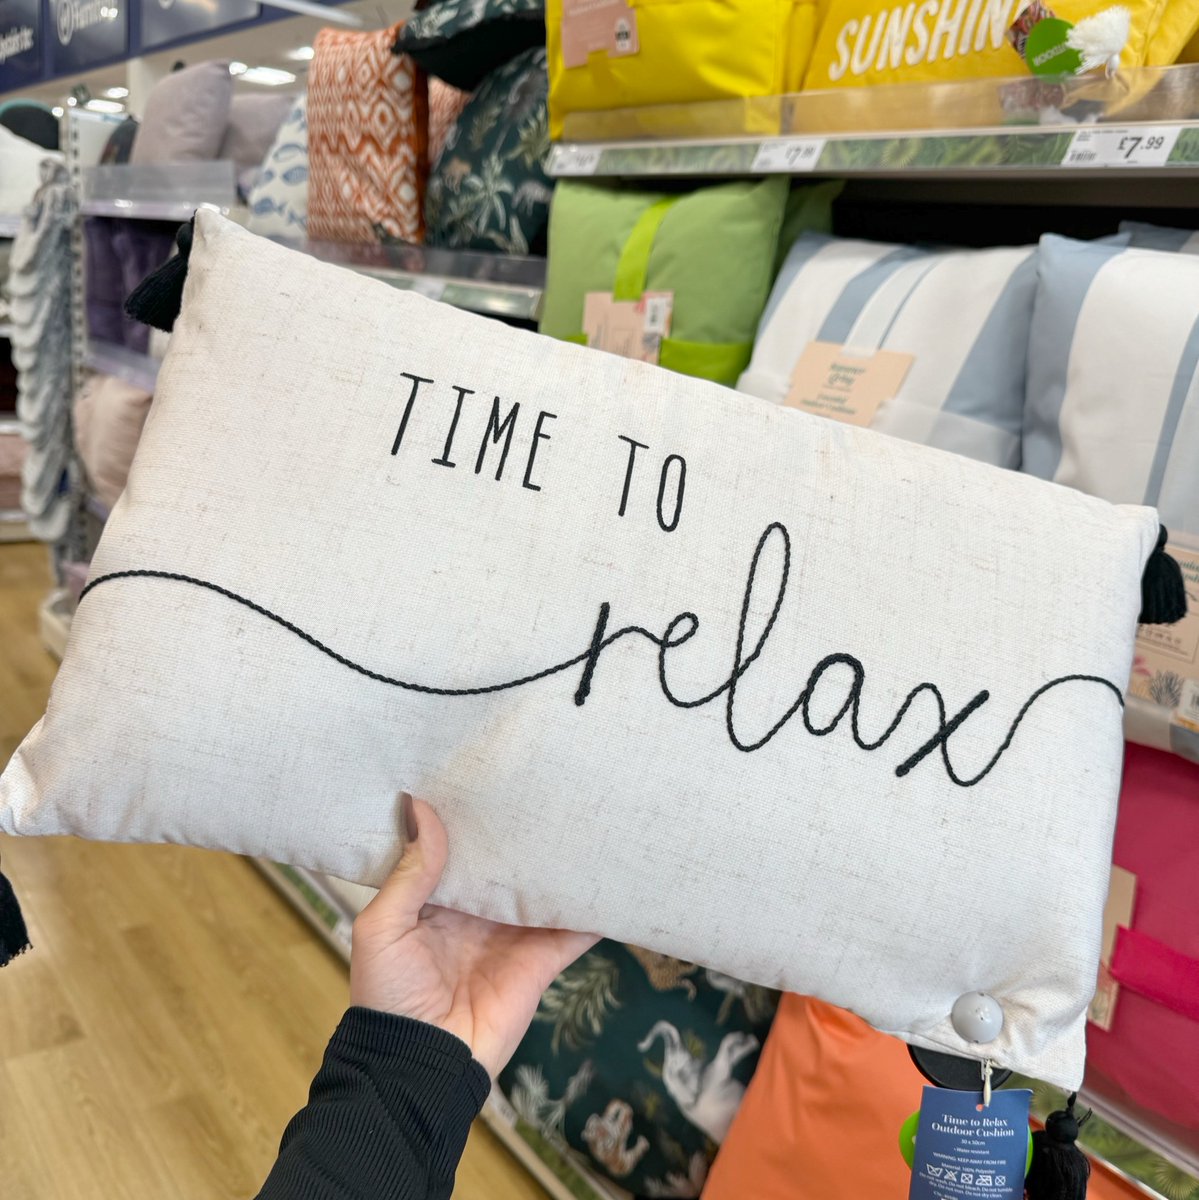 IT'S HERE ☀️😍🙌 🎉 The much needed Bank Holiday Weekend... Time to sit back & relax 🧡 🛒 Time to Relax Outdoor Cushion, only £7.99 available in-stores & online today >> bit.ly/3wqGhCN